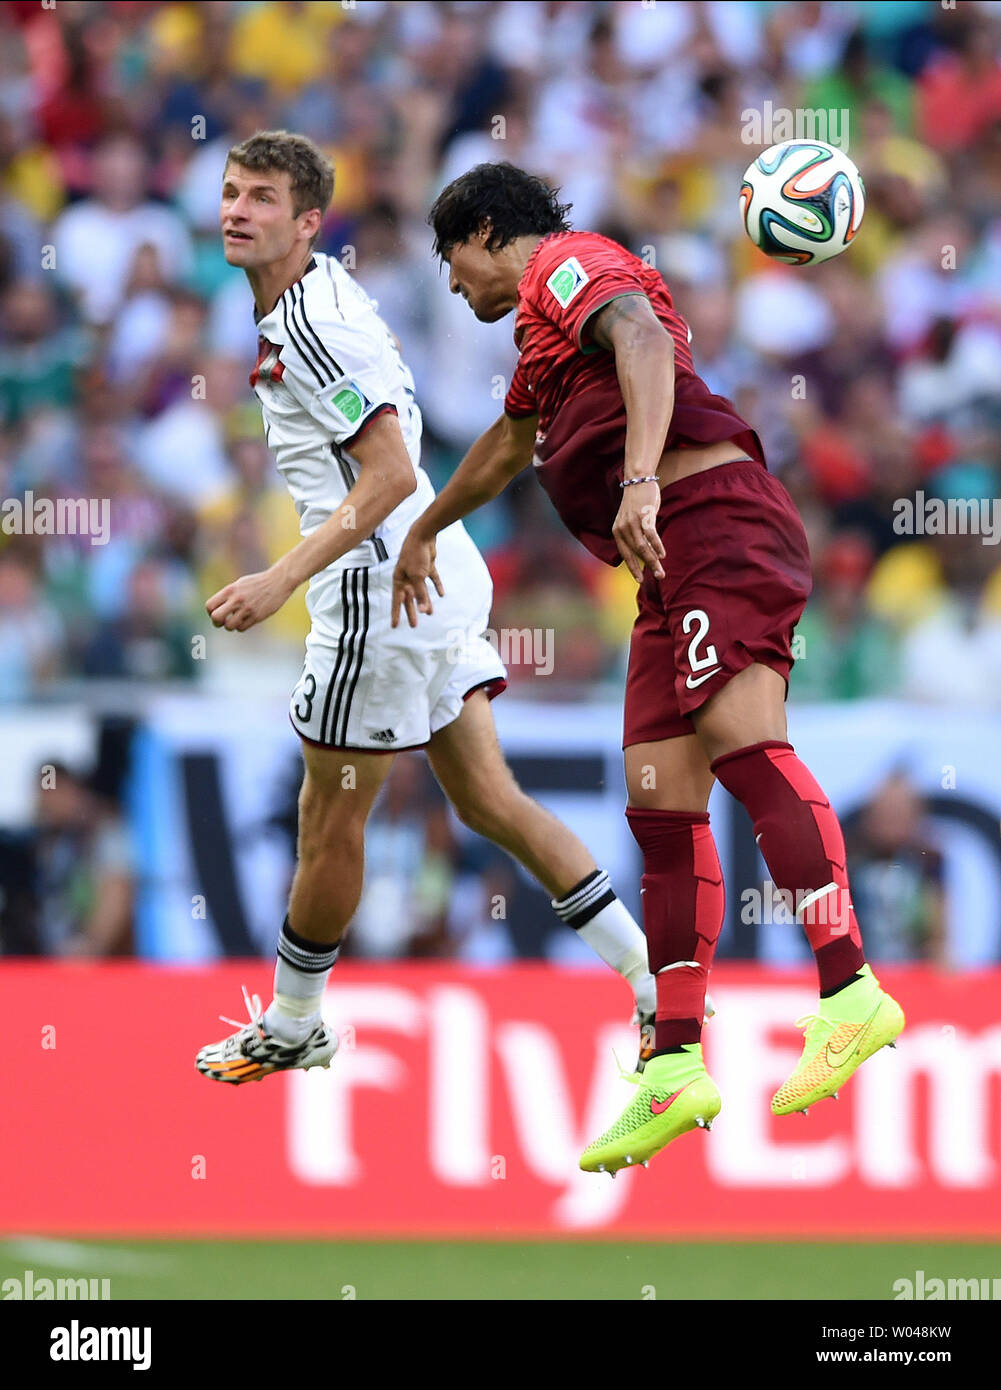 Thomas Muller of Germany jumps with Bruno Alves of Portugal during the 2014 FIFA World Cup Group G match at the Arena Fonte Nova in Salvador, Brazil on June 16, 2014. UPI/Chris Brunskill Stock Photo